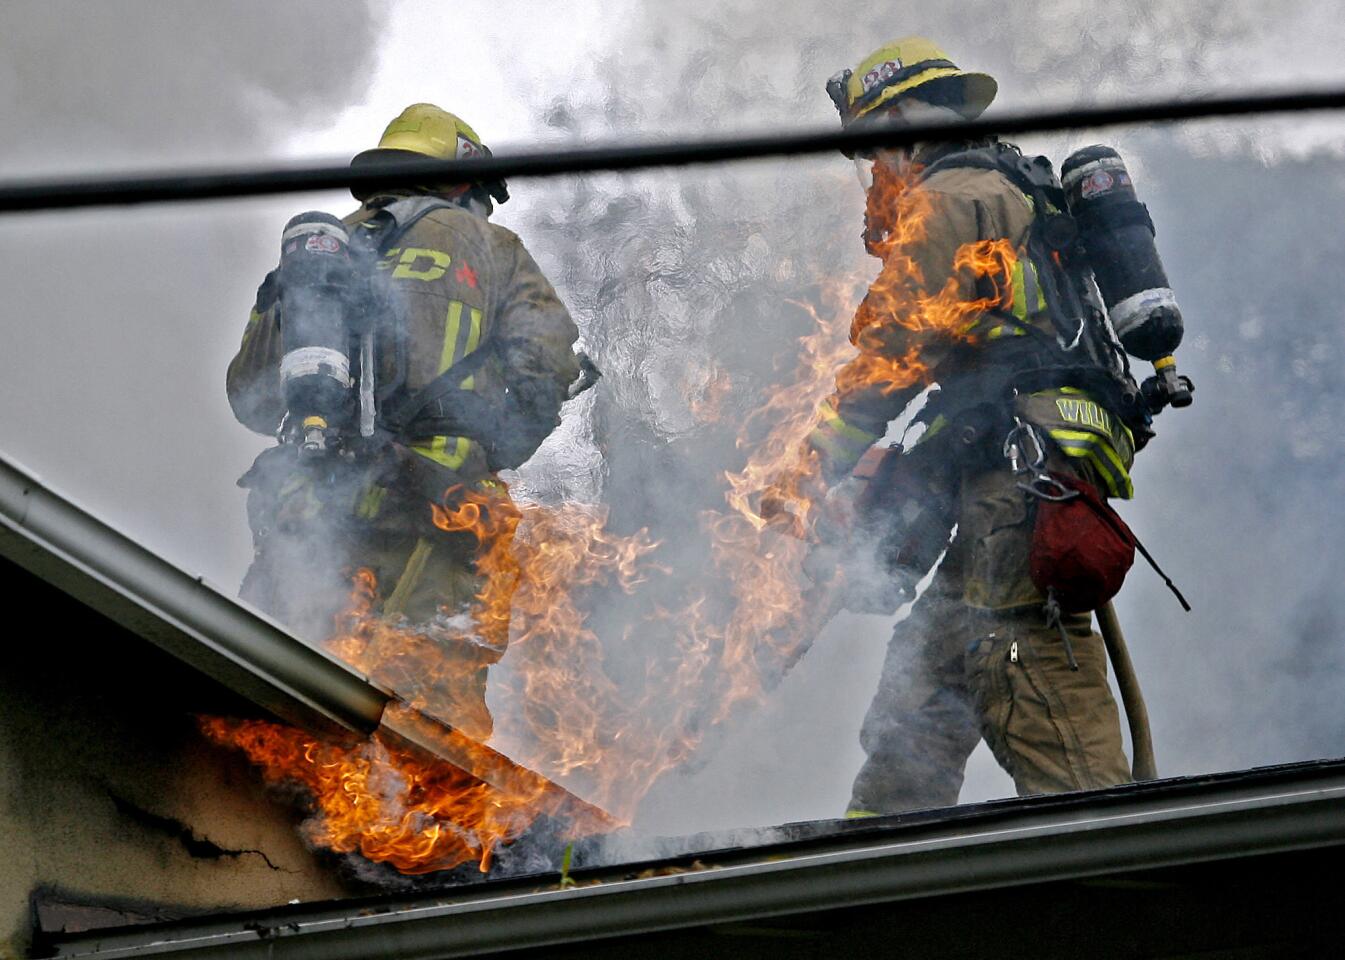 Glendale Fire Dept. firefighters prepare to cut hole in the roof of a burning home on the 1300 block of N. Jackson St. in Glendale on Friday, November 30, 2012.